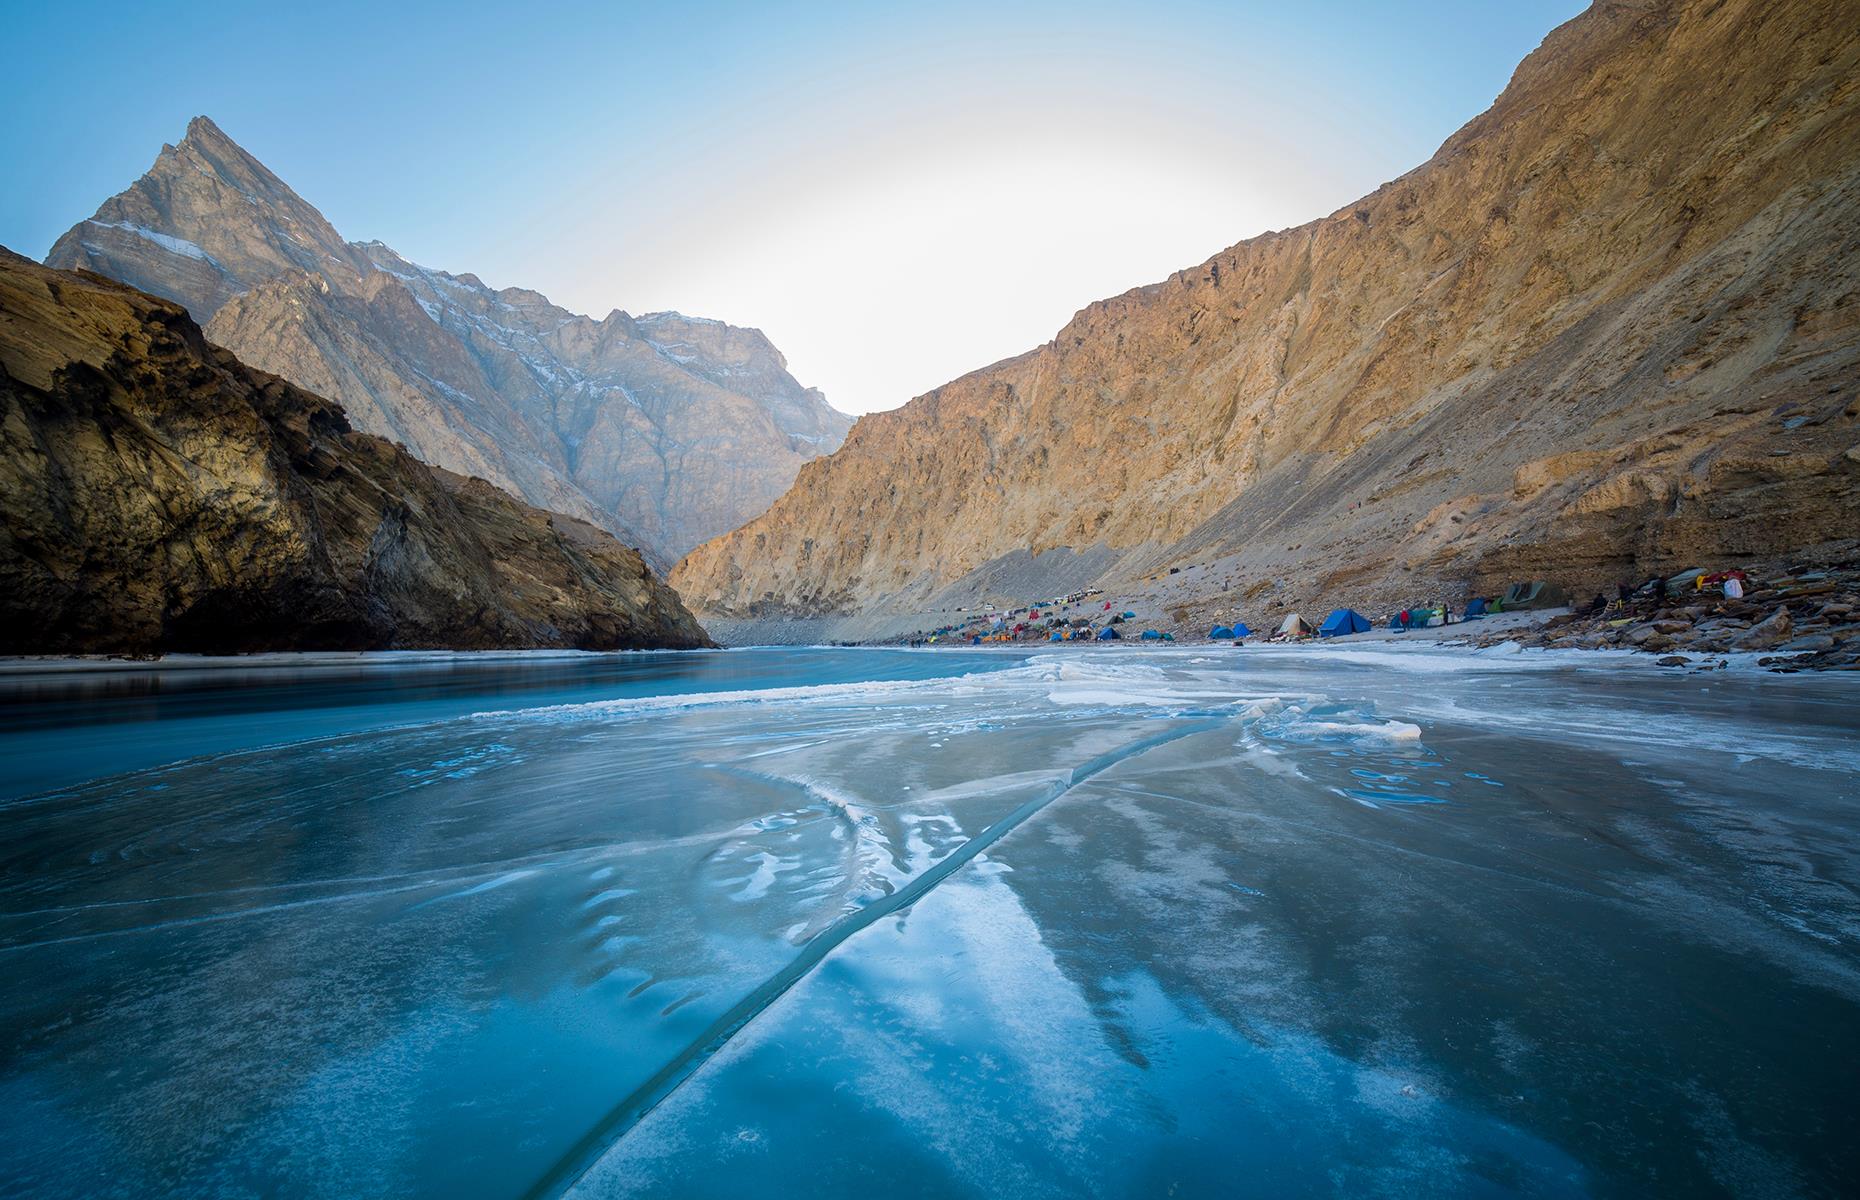 <p>Fancy walking along a frozen river in the Himalayas? Only for the brave, the Chadar Trek is a wild adventure. There's nothing quite like it in the world, as hikers take to the frozen surface of the Zanskar River to tour Ladakh's majestic mountain scenery.</p>  <p>The hike passes remote villages and caves, and there's even a chance you'll see a snow leopard.</p>